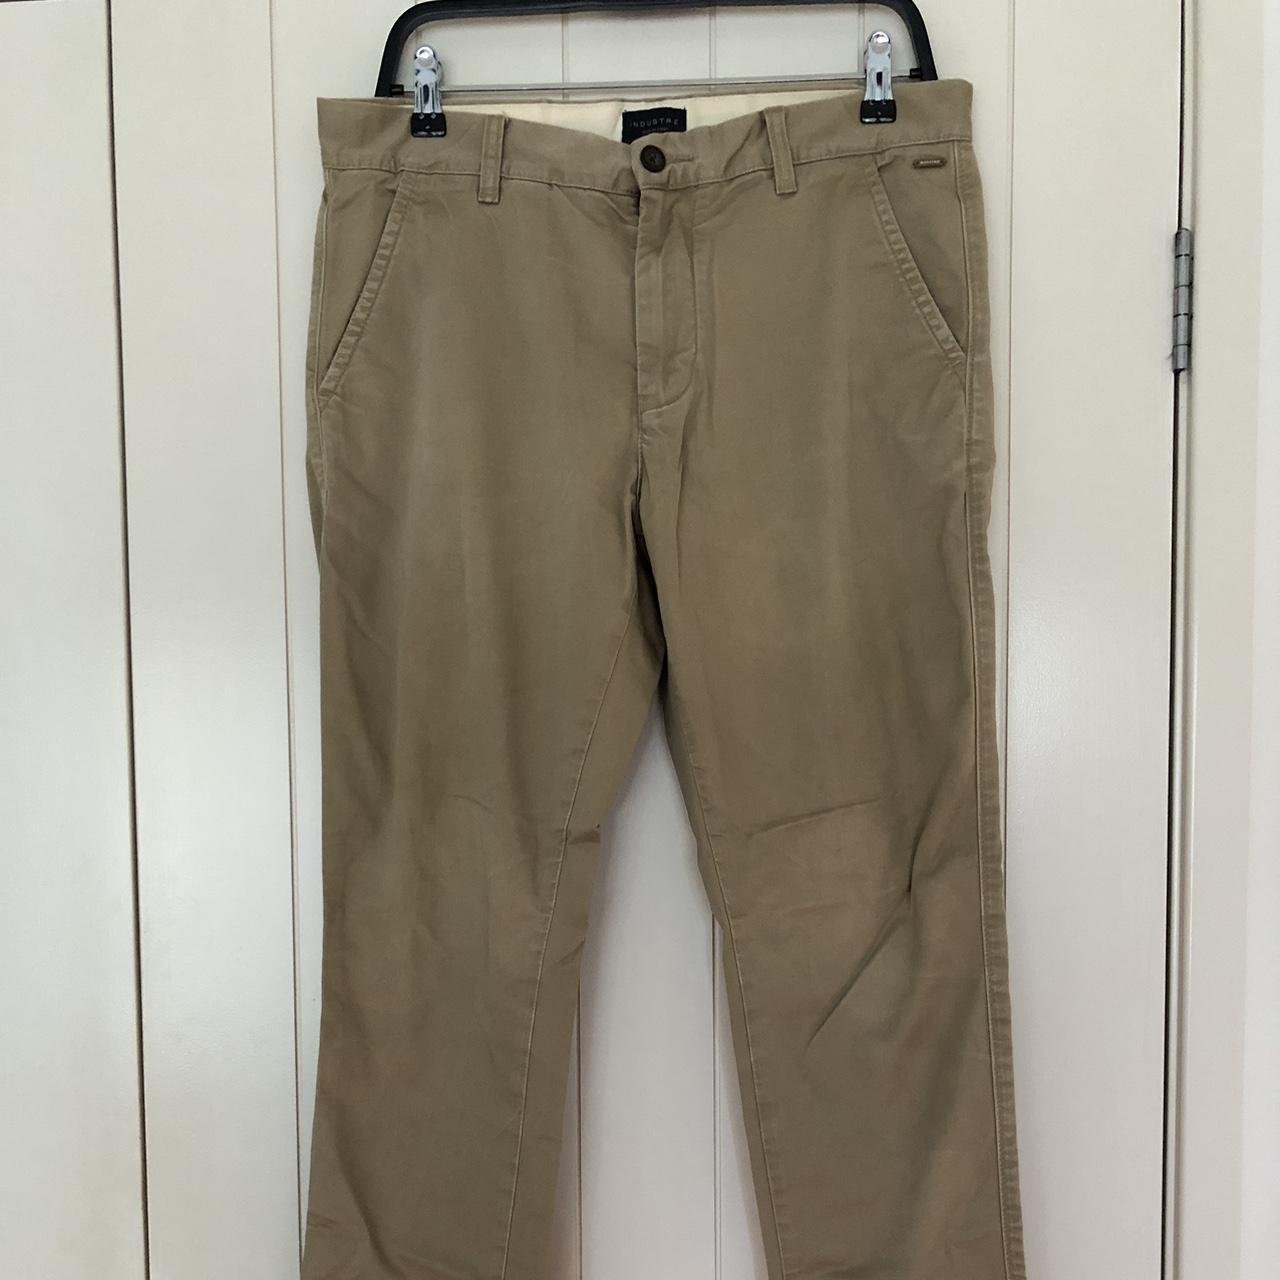 INDUSTRE chino pants Tan colour Size 32 Happy to... - Depop